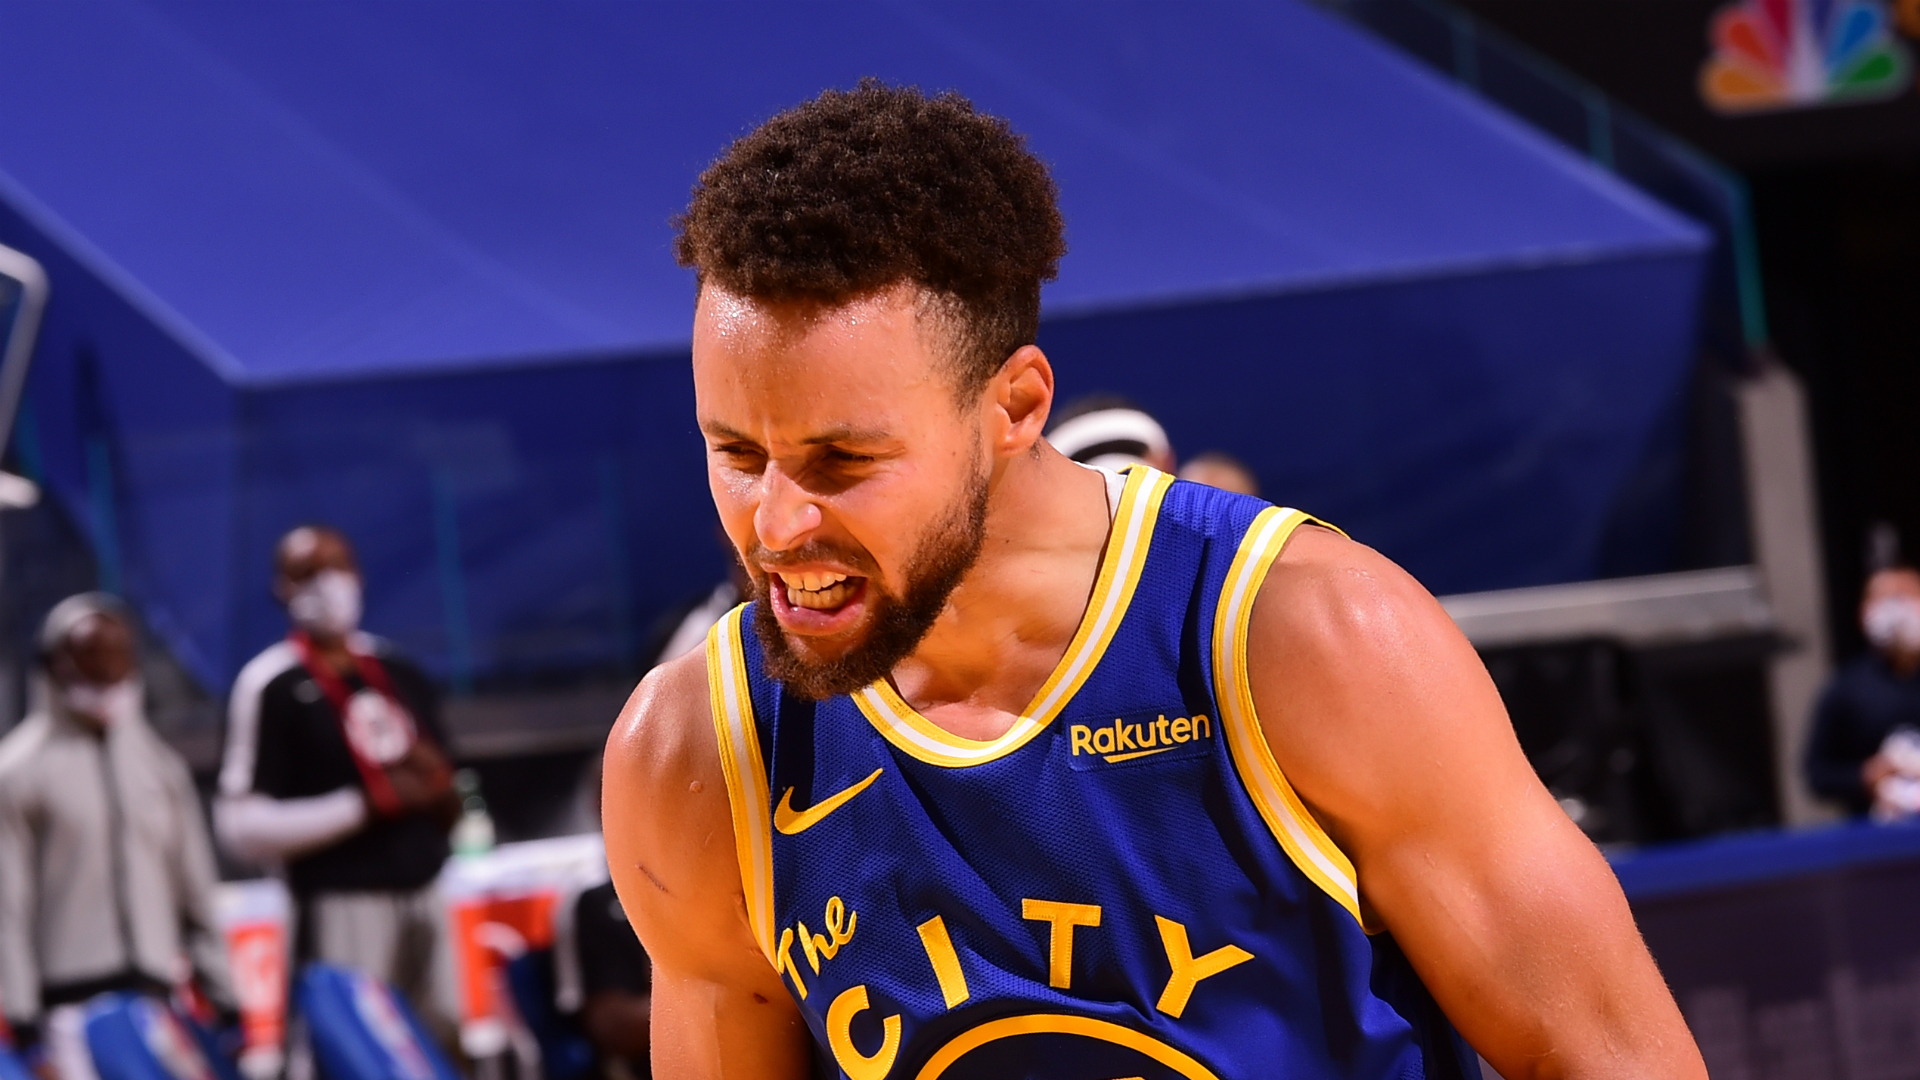 Sizzling Curry breaks NBA 3-point record